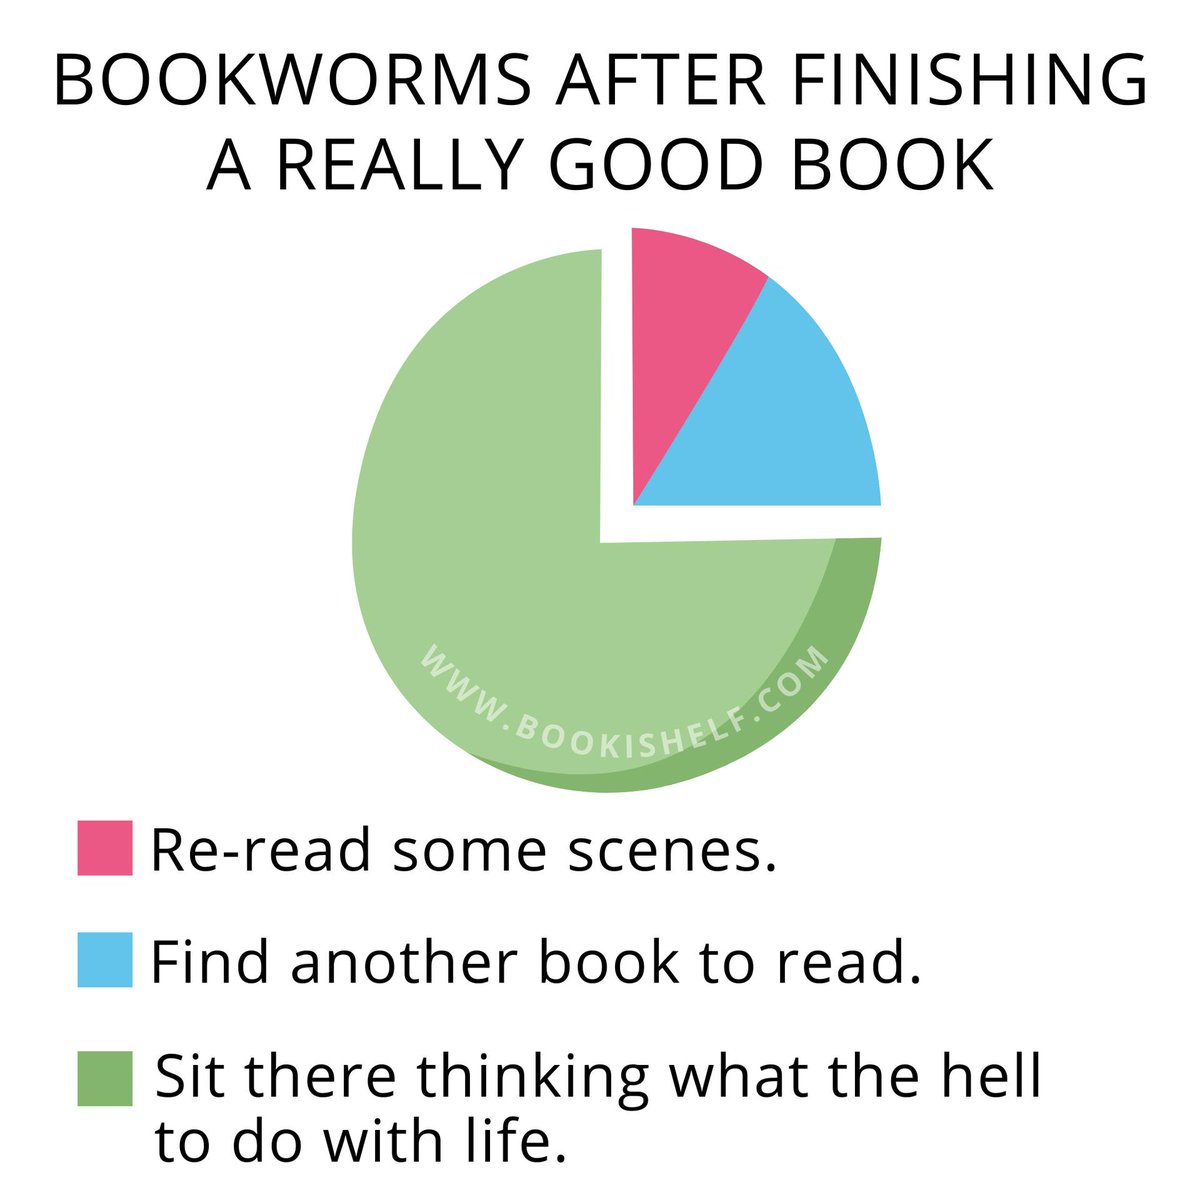 Morning Twitterland 🙂 This is pretty accurate 😳 📚💜#LoveLibraries #LoveBooks #LoveReading💜📚 (Source: @thebookishelf)